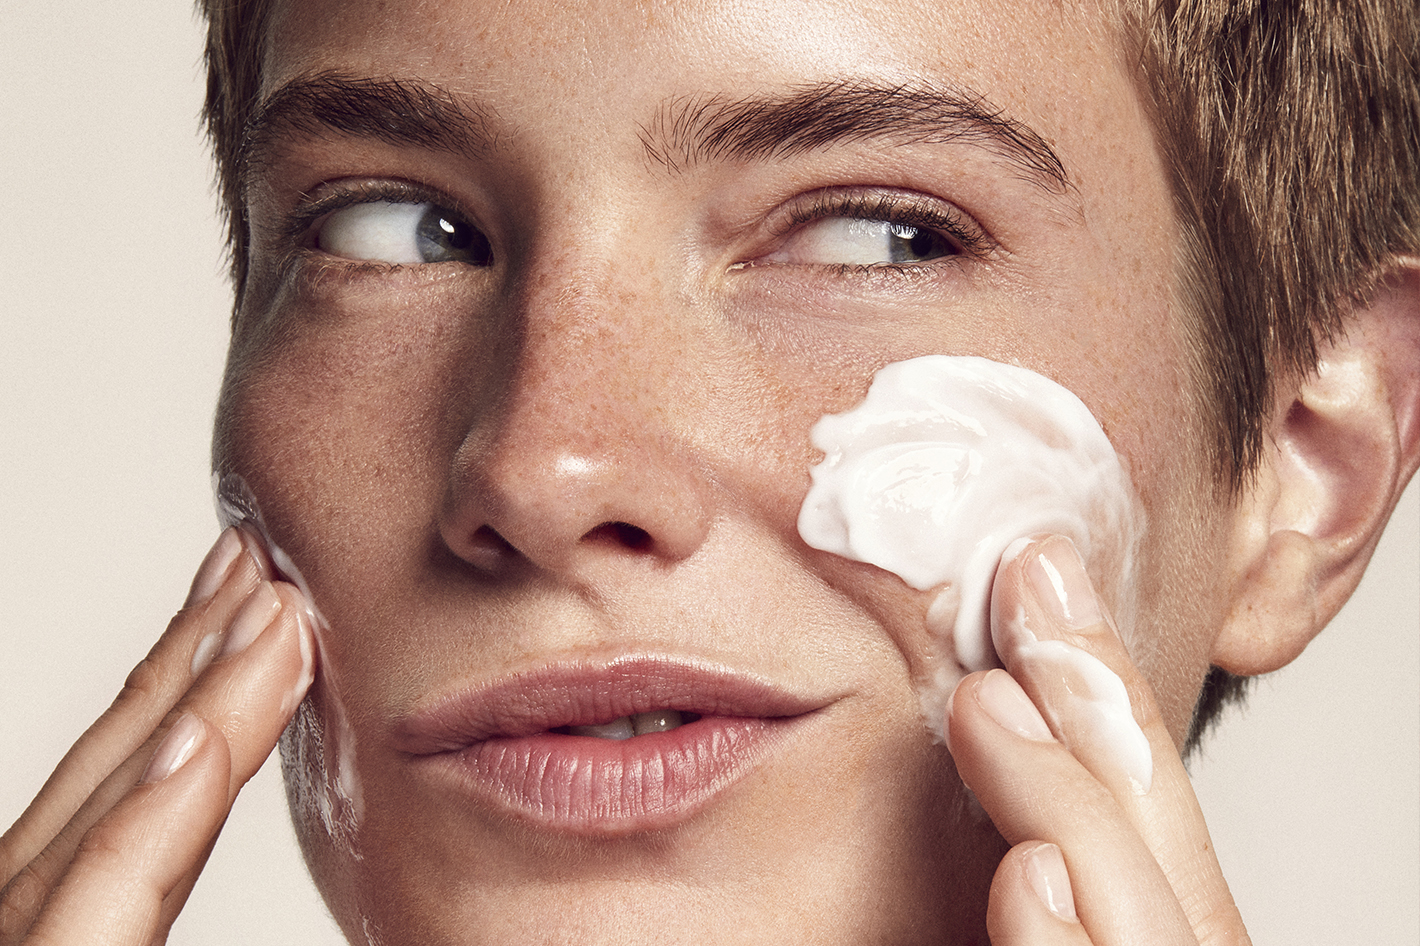 How To Get Better Skin: The 4 Things To Know For Good Skin